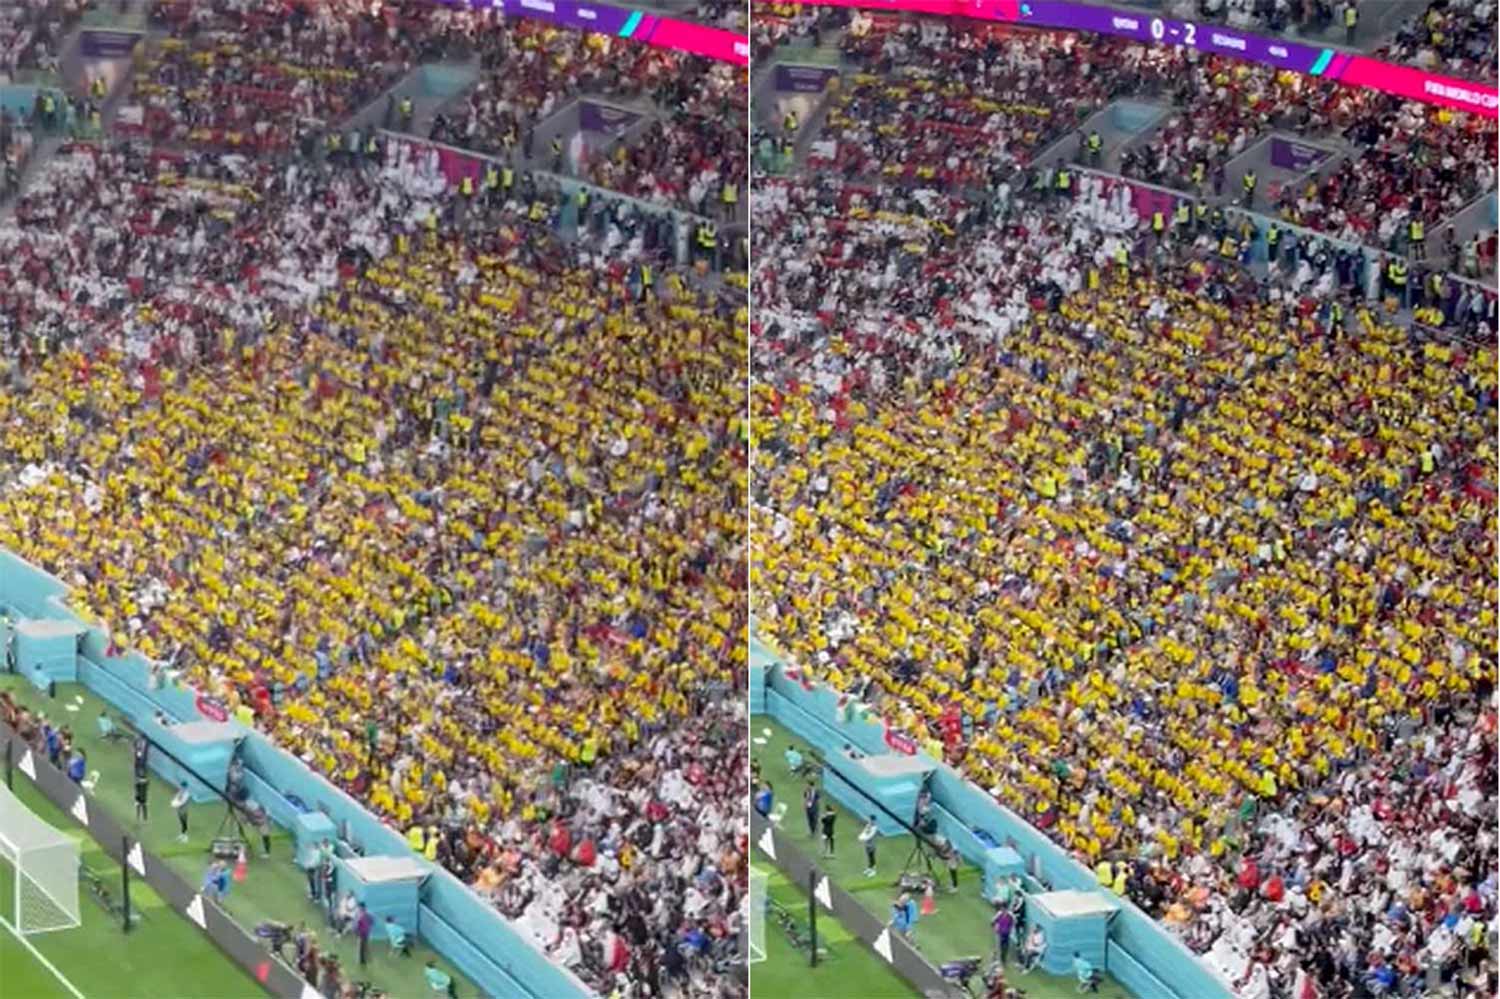 ‘We Want Beer’: Ecuador Fans Chant What Everyone Else Is Thinking